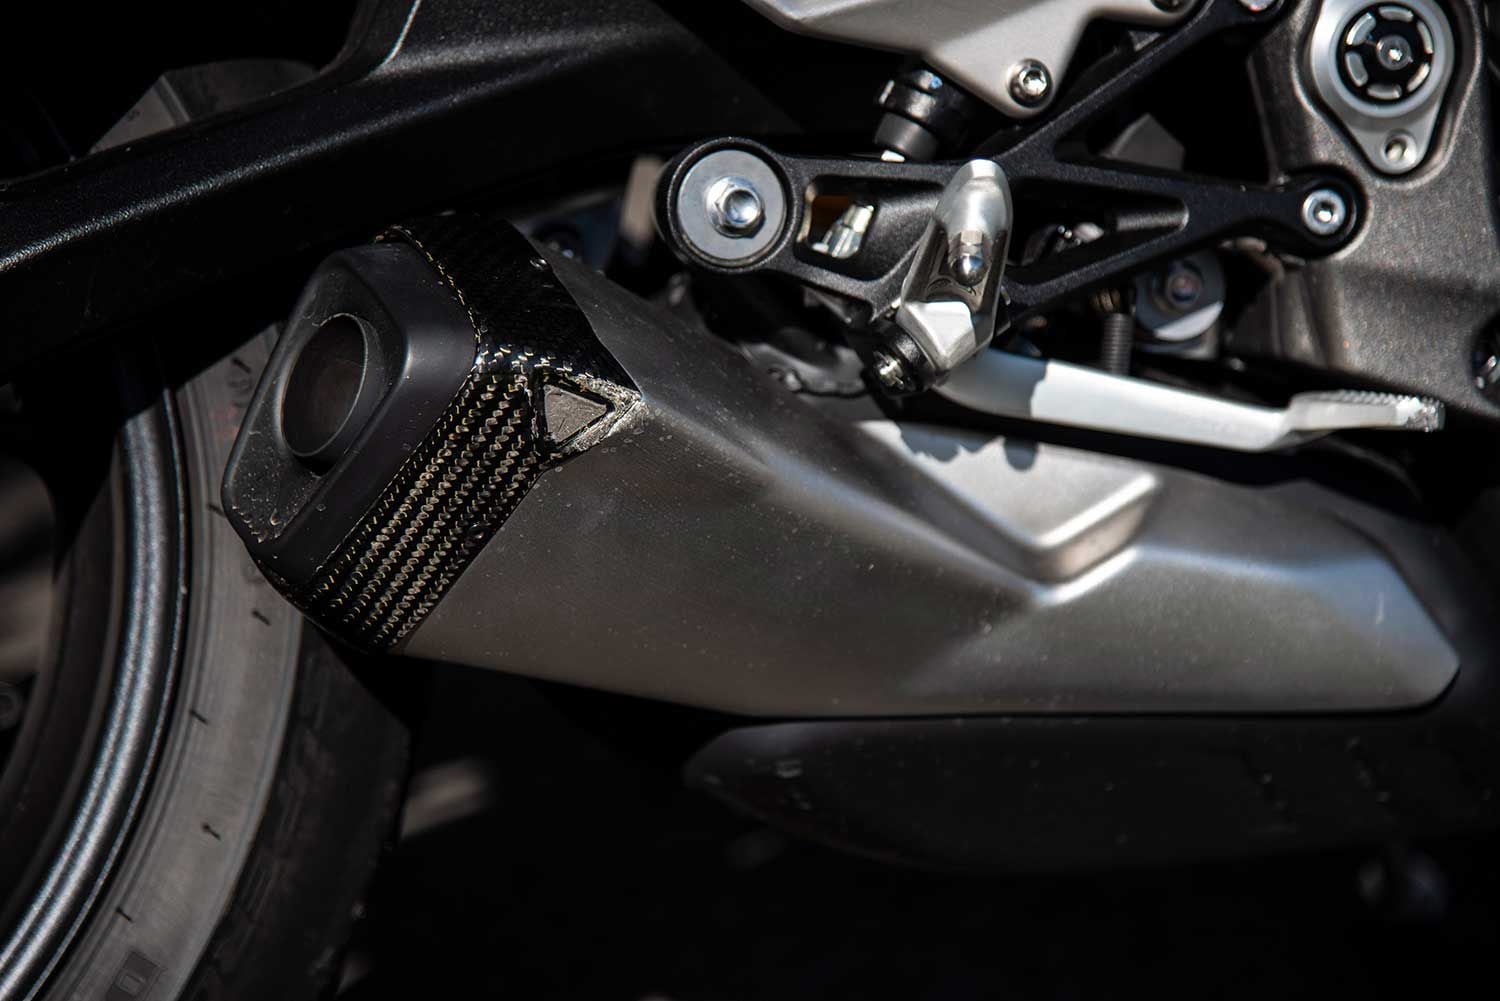 The underslung stainless steel 3-into-1 exhaust is not only visually minimalist, it lowers the center of gravity to aid handling.